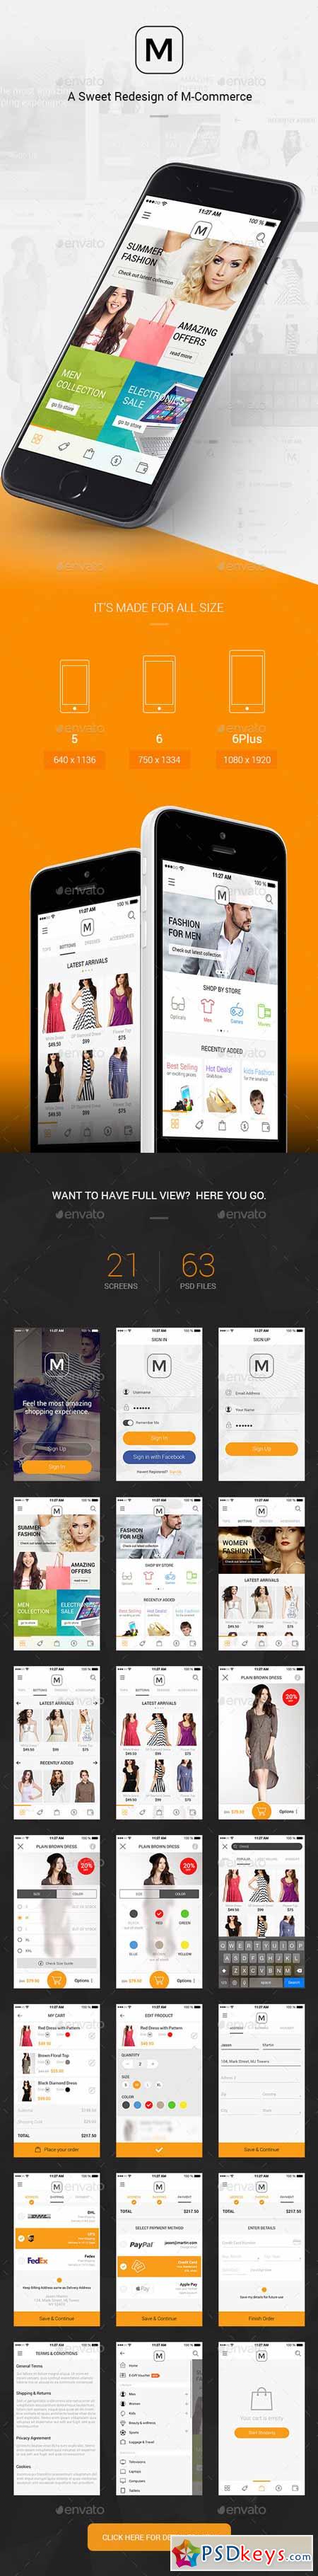 M - A Sweet Redesign Of M-Commerce 11357381